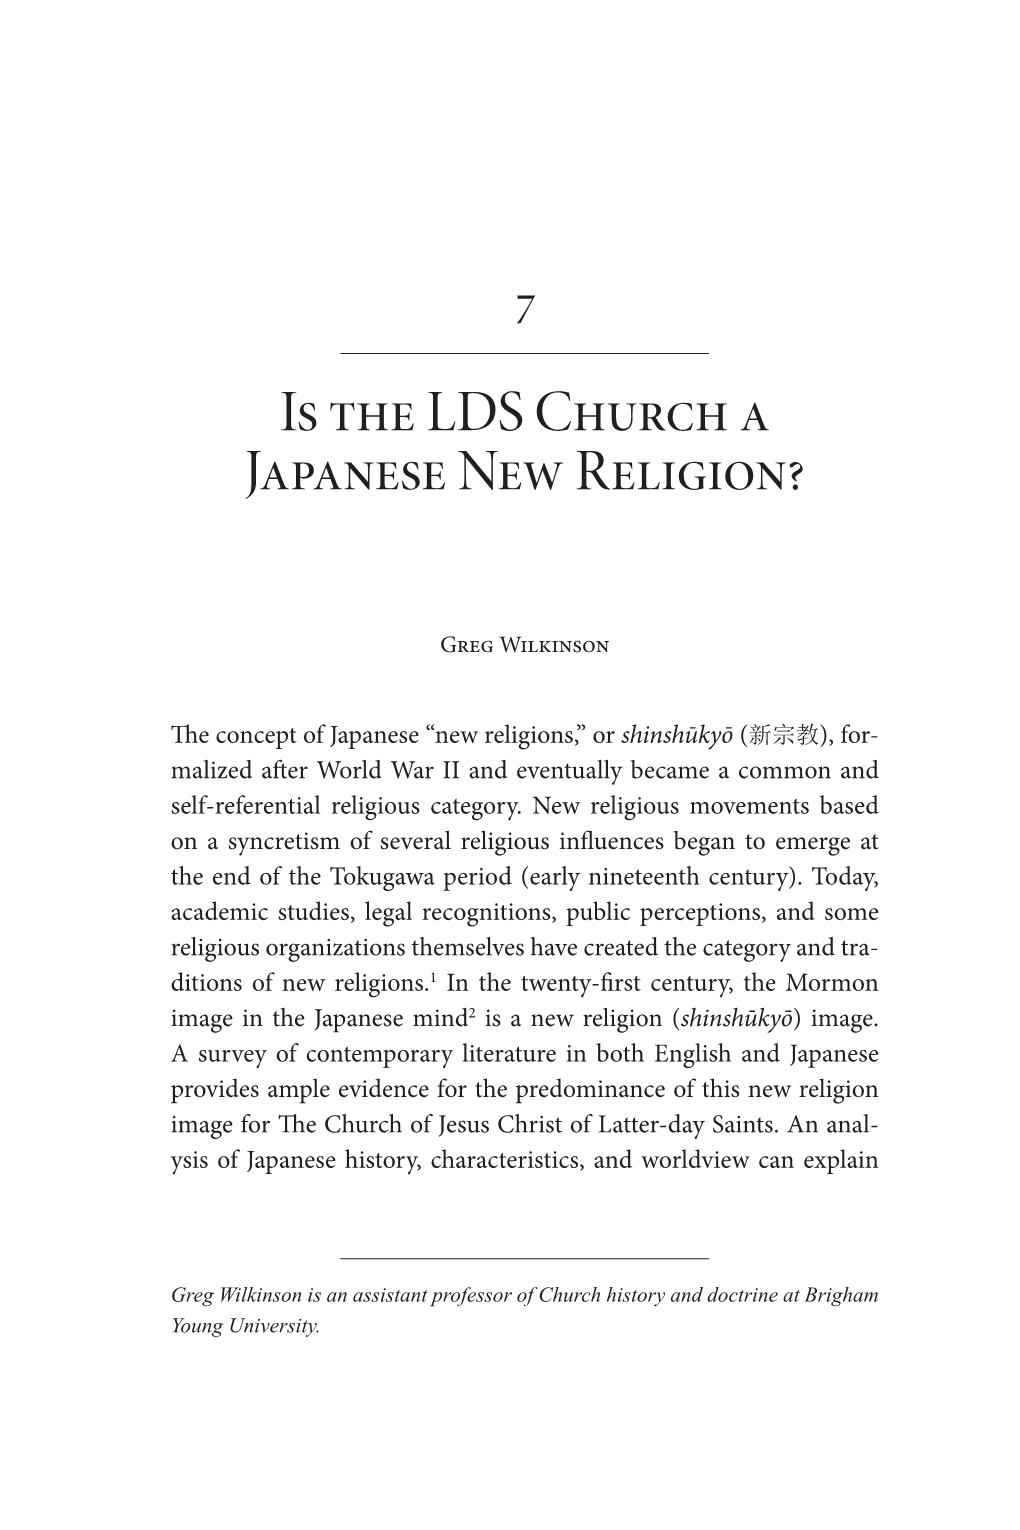 Is the LDS Church a Japanese New Religion?